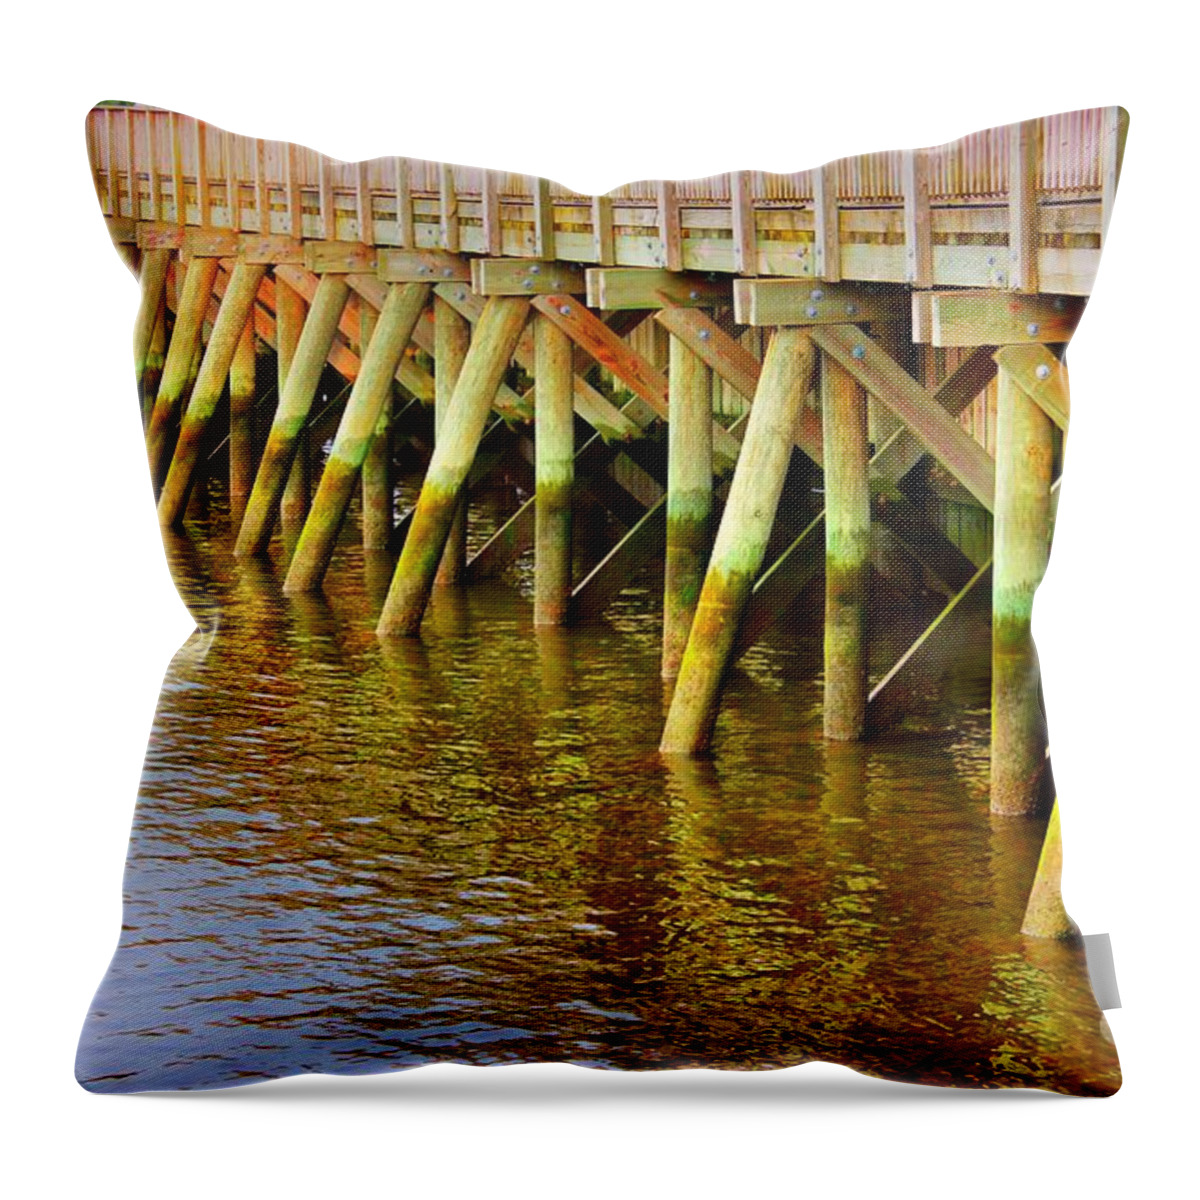 Pier Throw Pillow featuring the photograph Low Tide by Judy Palkimas